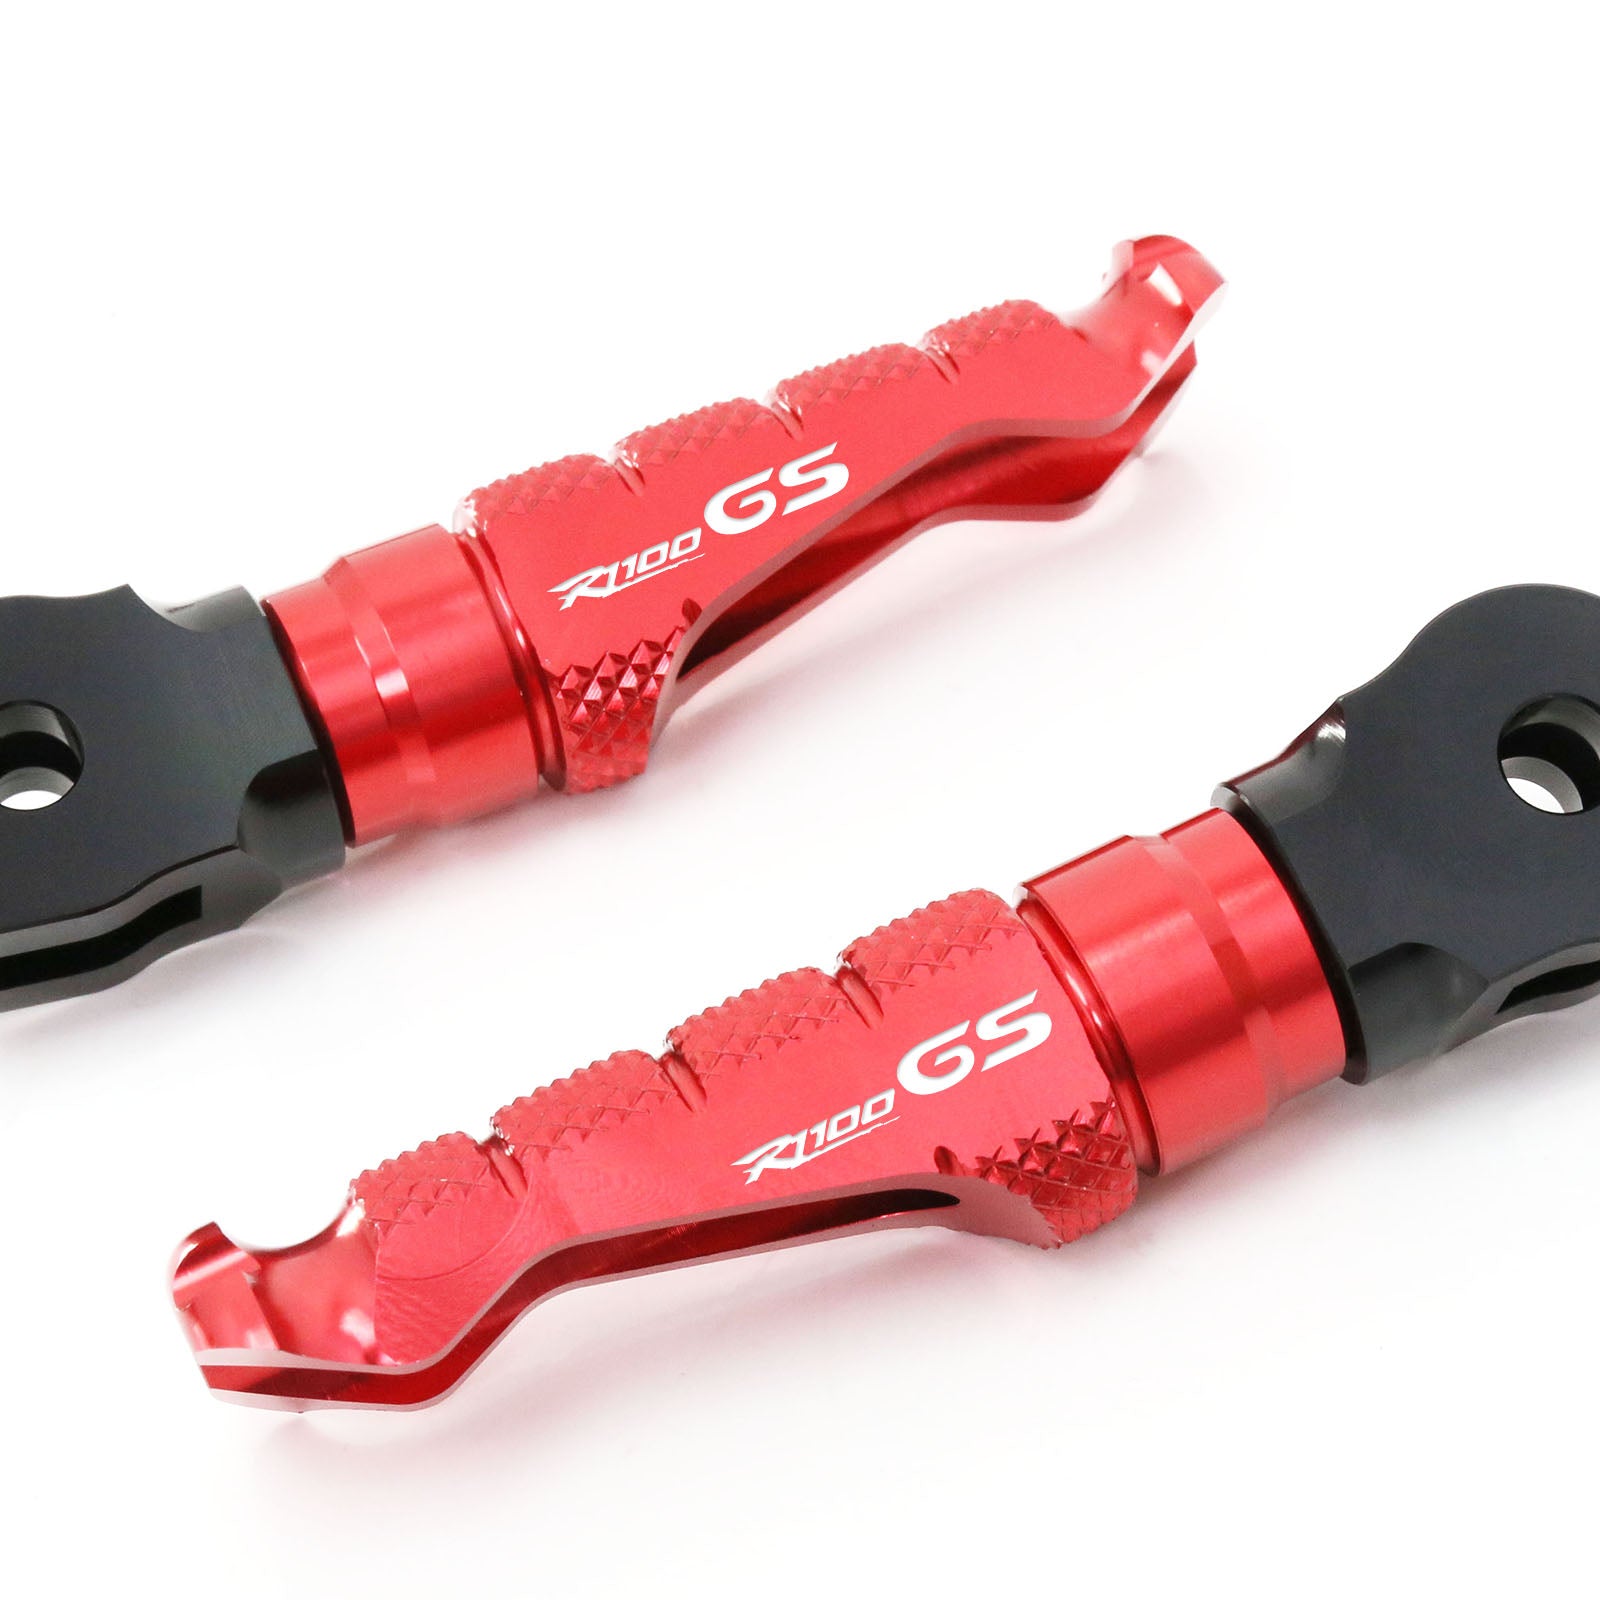 BMW R1100GS engraved front rider Red Foot Pegs